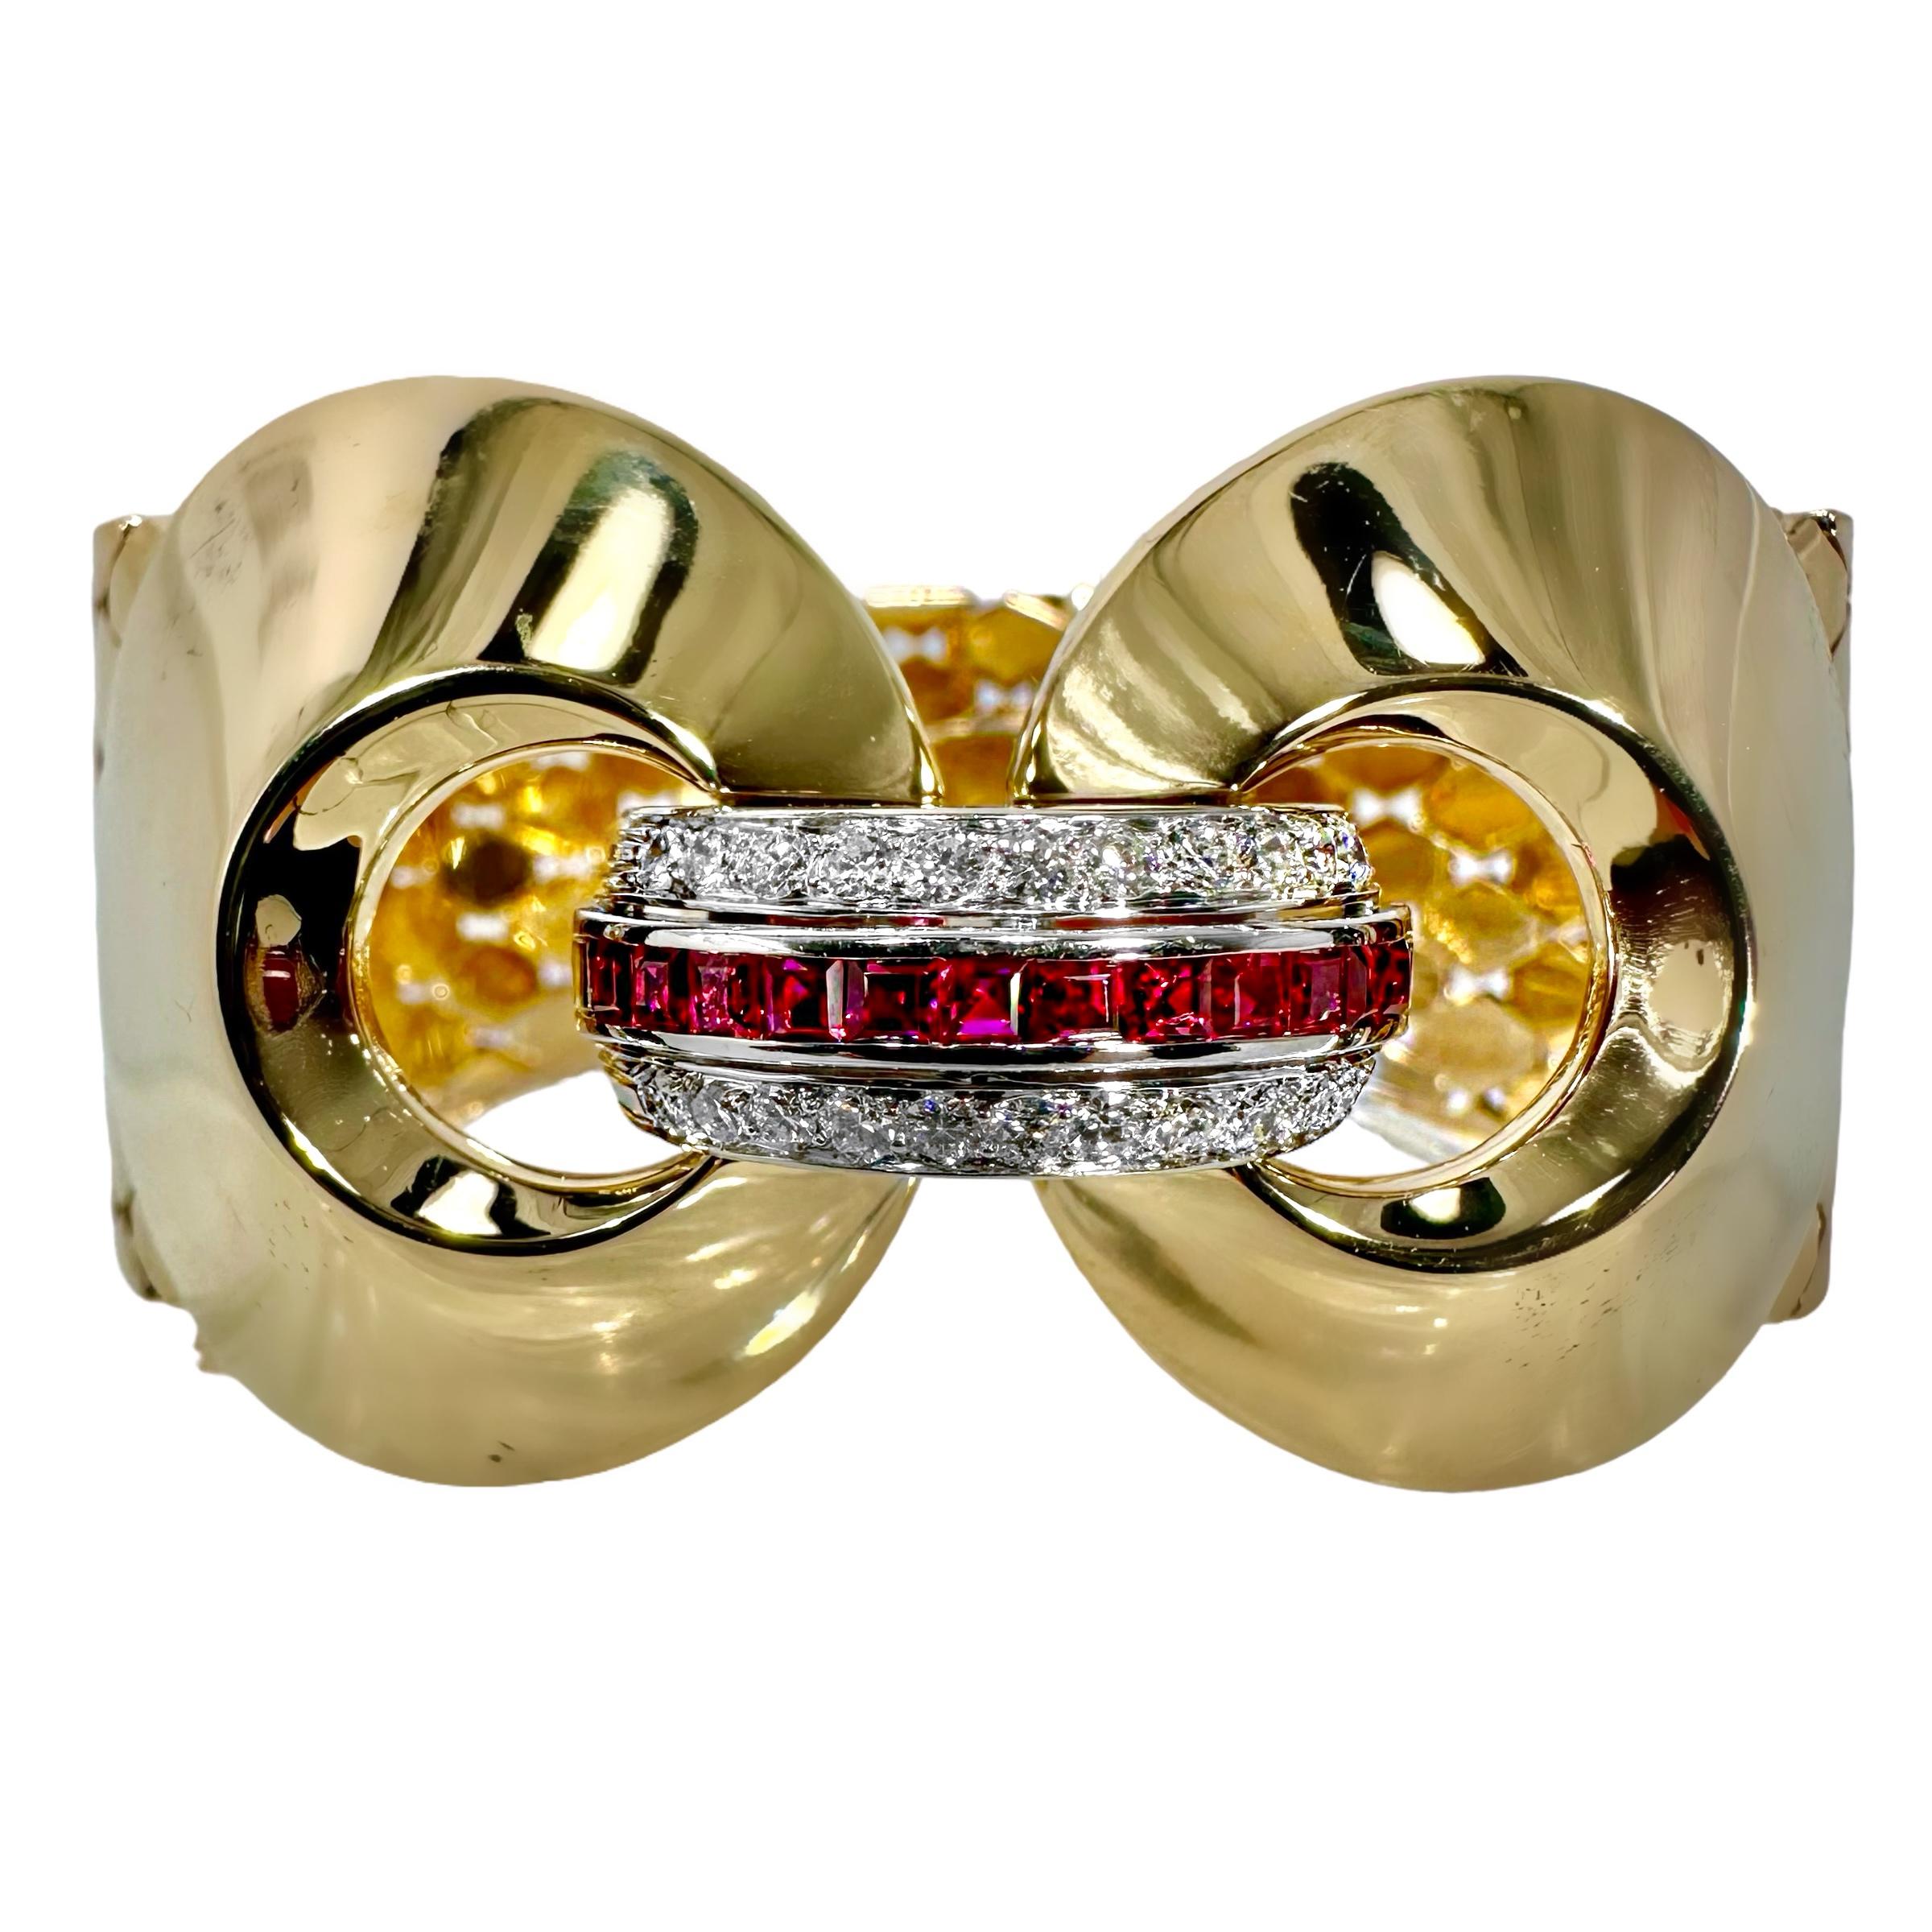 This Retro Period American bracelet embodies all the drama and high style of the best jewelry, art, and architecture of the era. A center platinum domed plate is set with a single line of square cut, natural rubies, flanked by 22 Late European cut